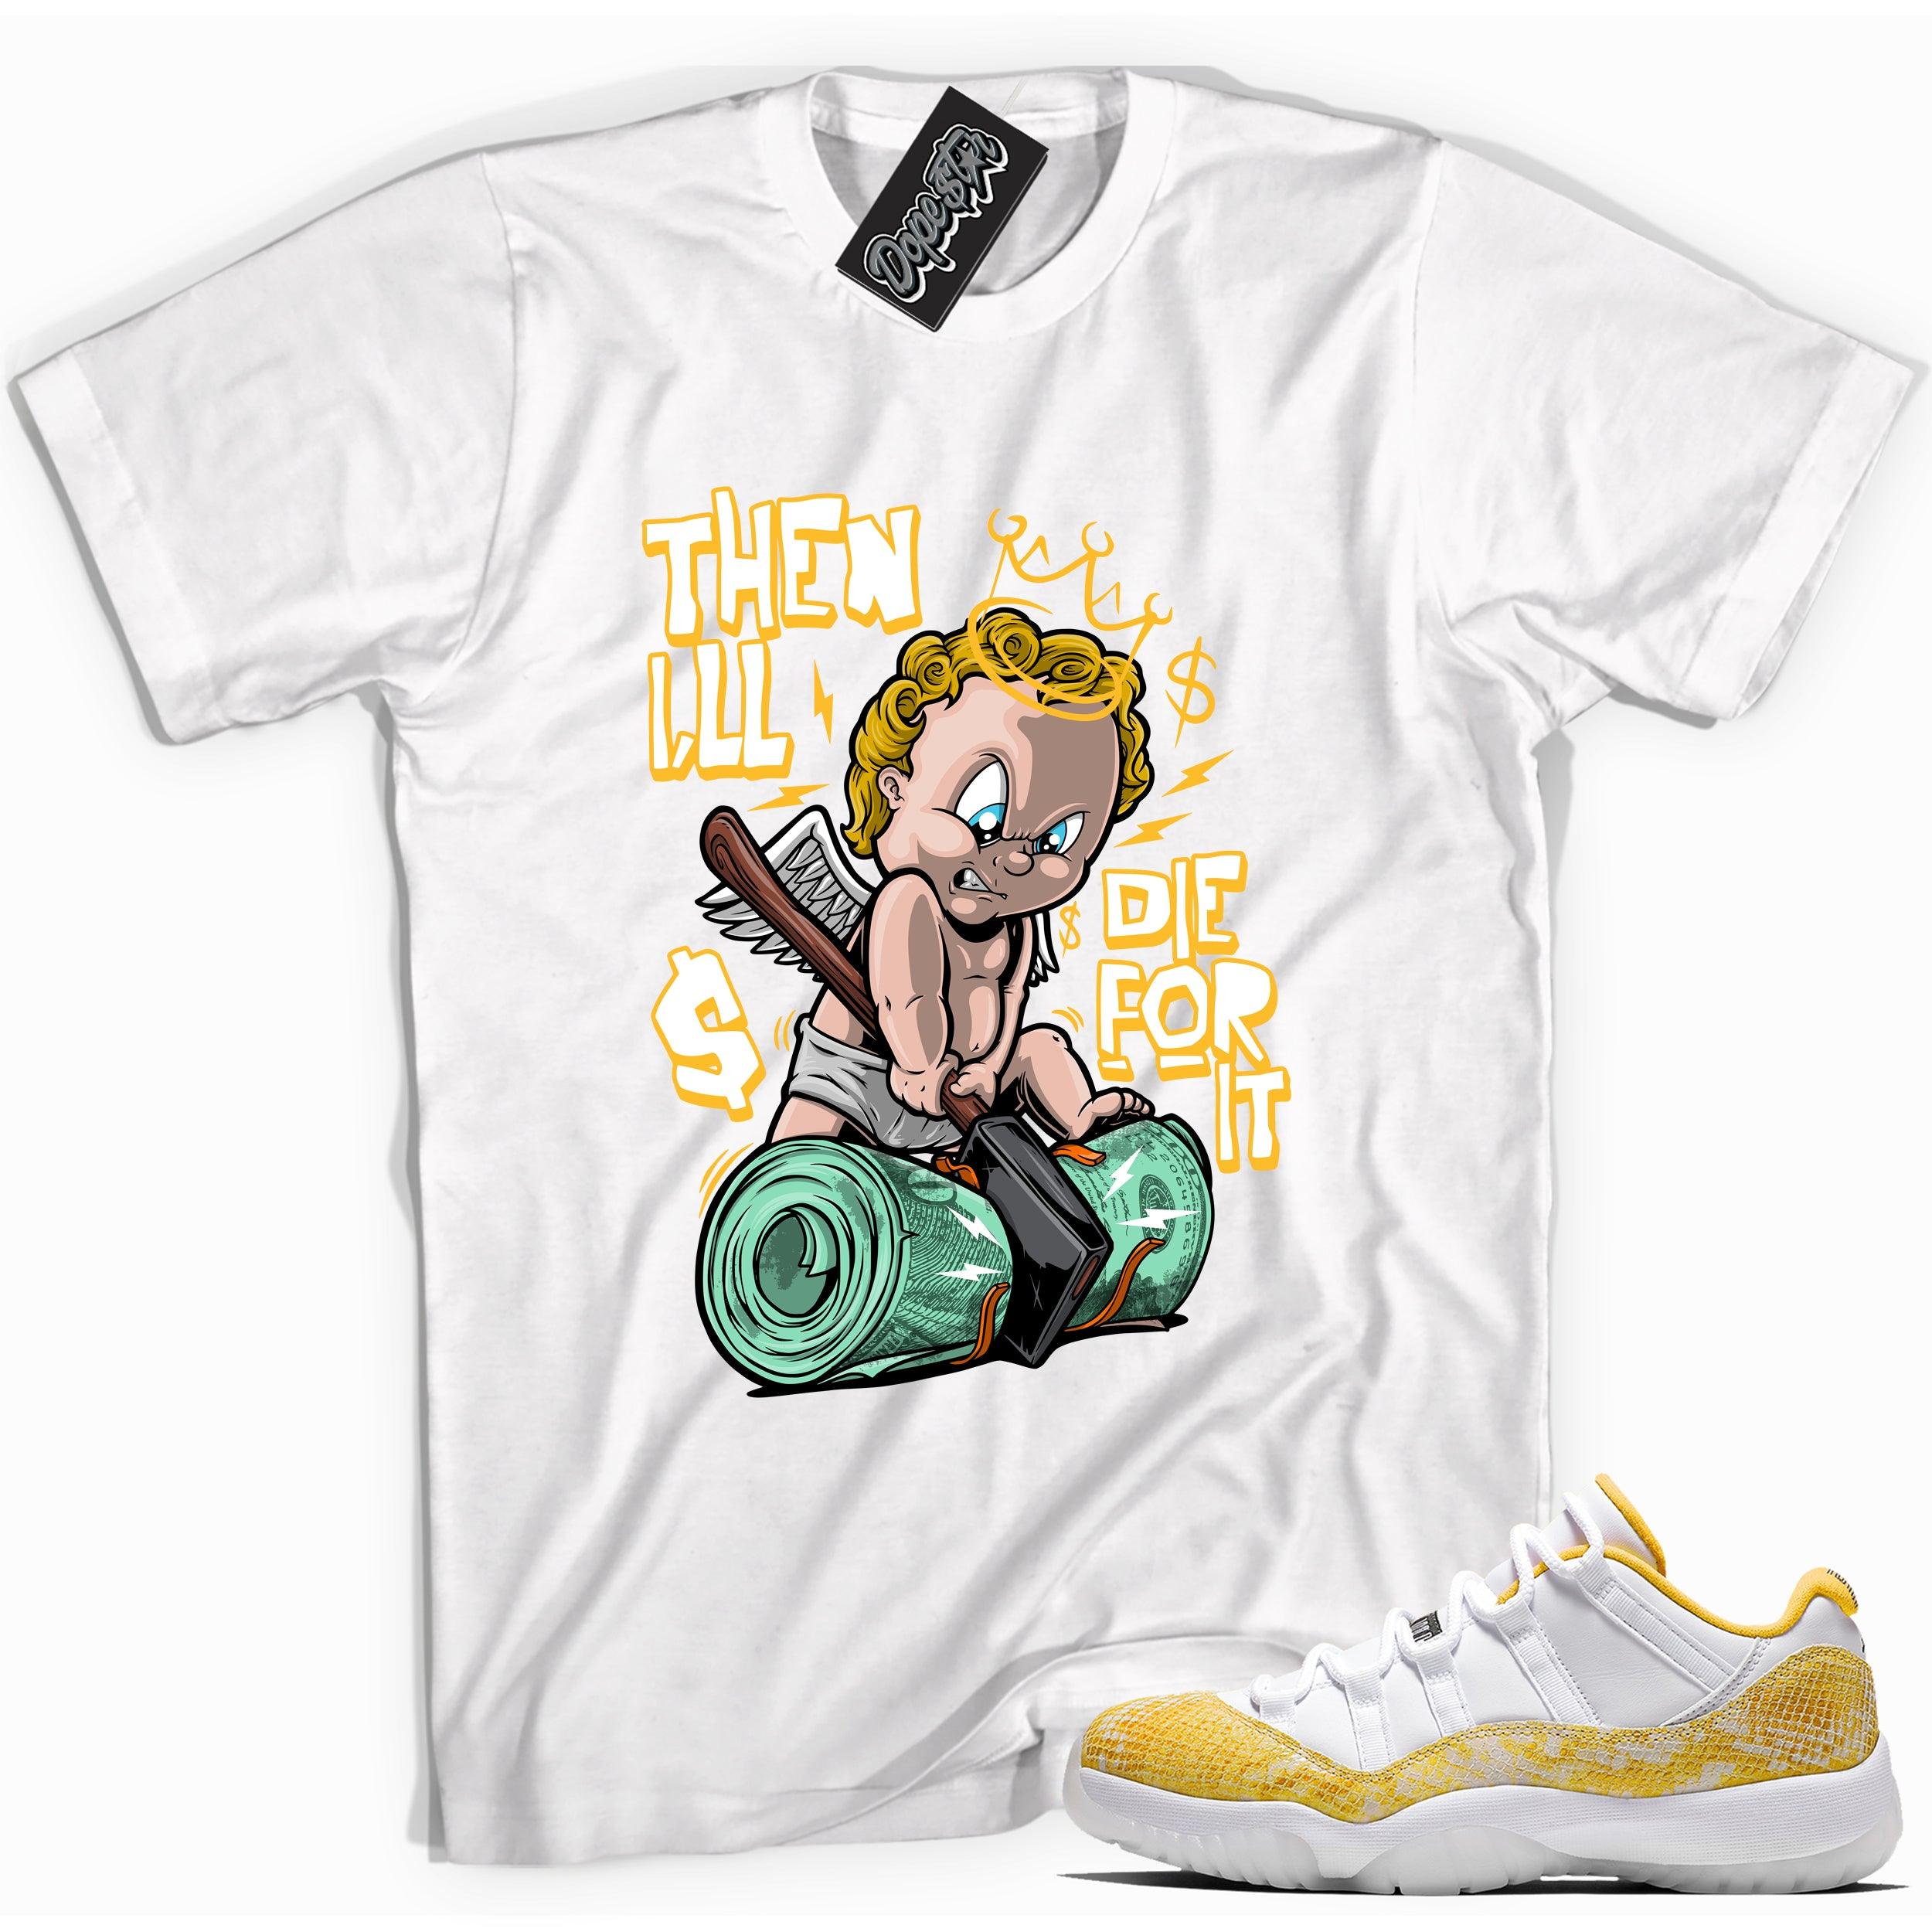 Cool white graphic tee with 'then i'll die for it' print, that perfectly matches Air Jordan 11 Retro Low Yellow Snakeskin sneakers